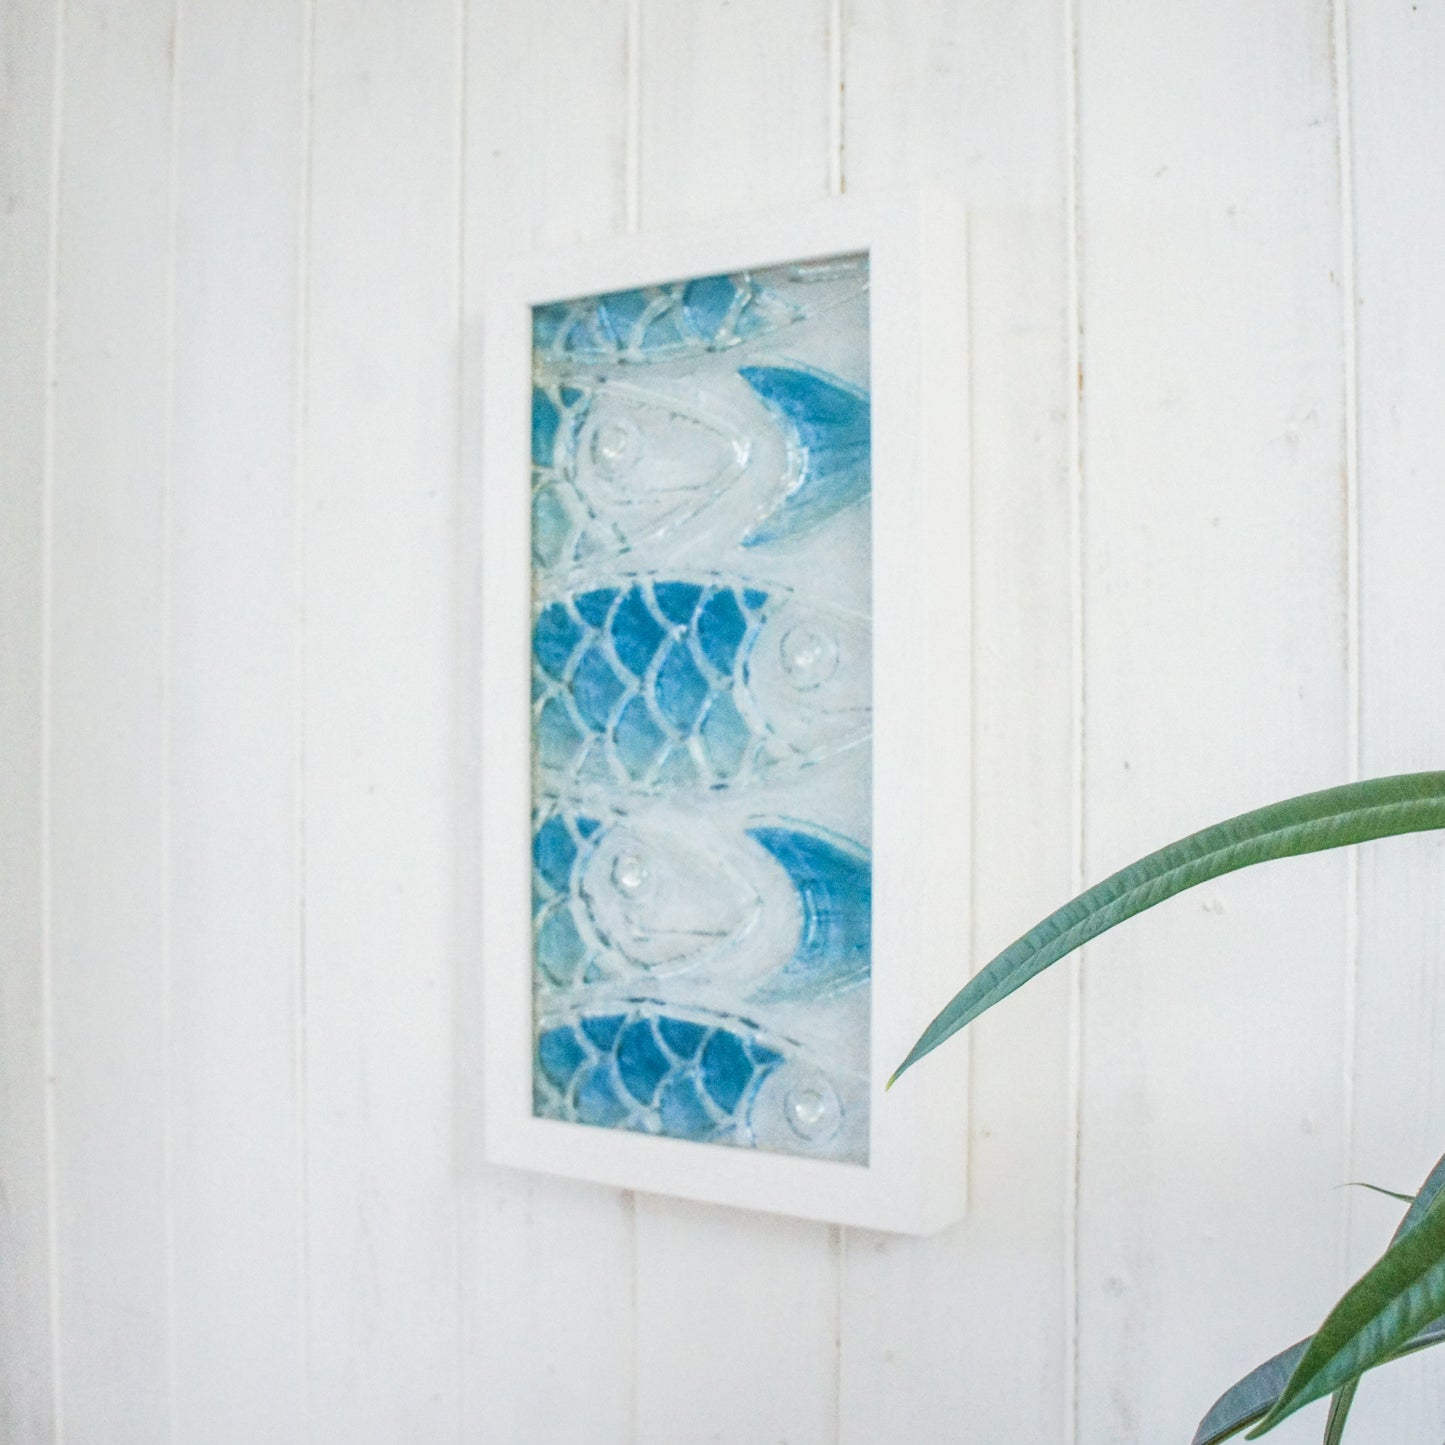 Fused Glass Fish Wall Art Portrait 18x34cm (7x13"), Blue FishCrowd Glass Framed Picture